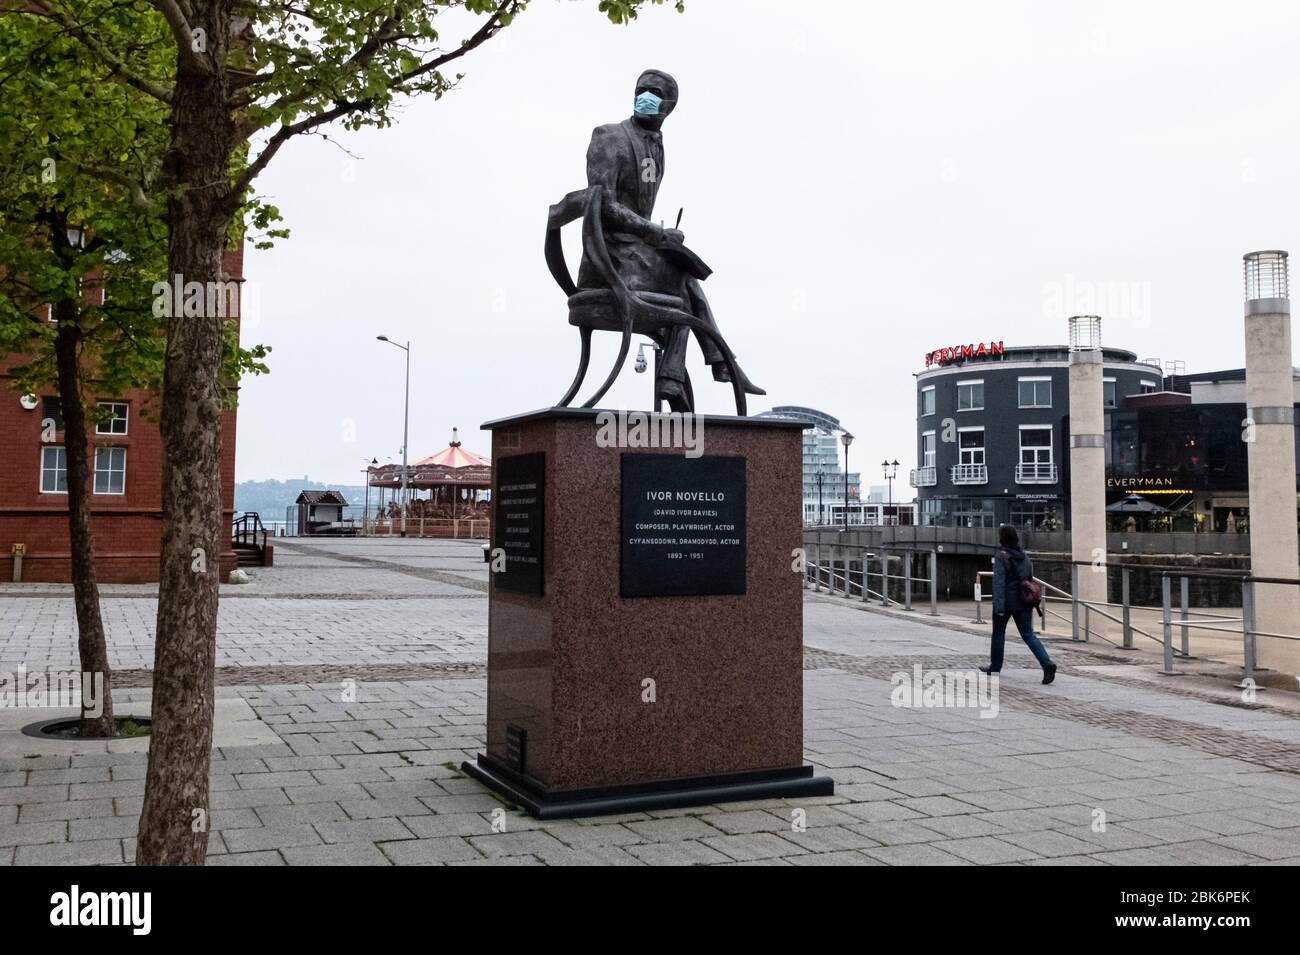 Statue of Welsh composer and actor Ivor Novello in Cardiff Bay, Wales, has his face covered with a face mask during the coronavirus COVID19 pandemic Stock Photo